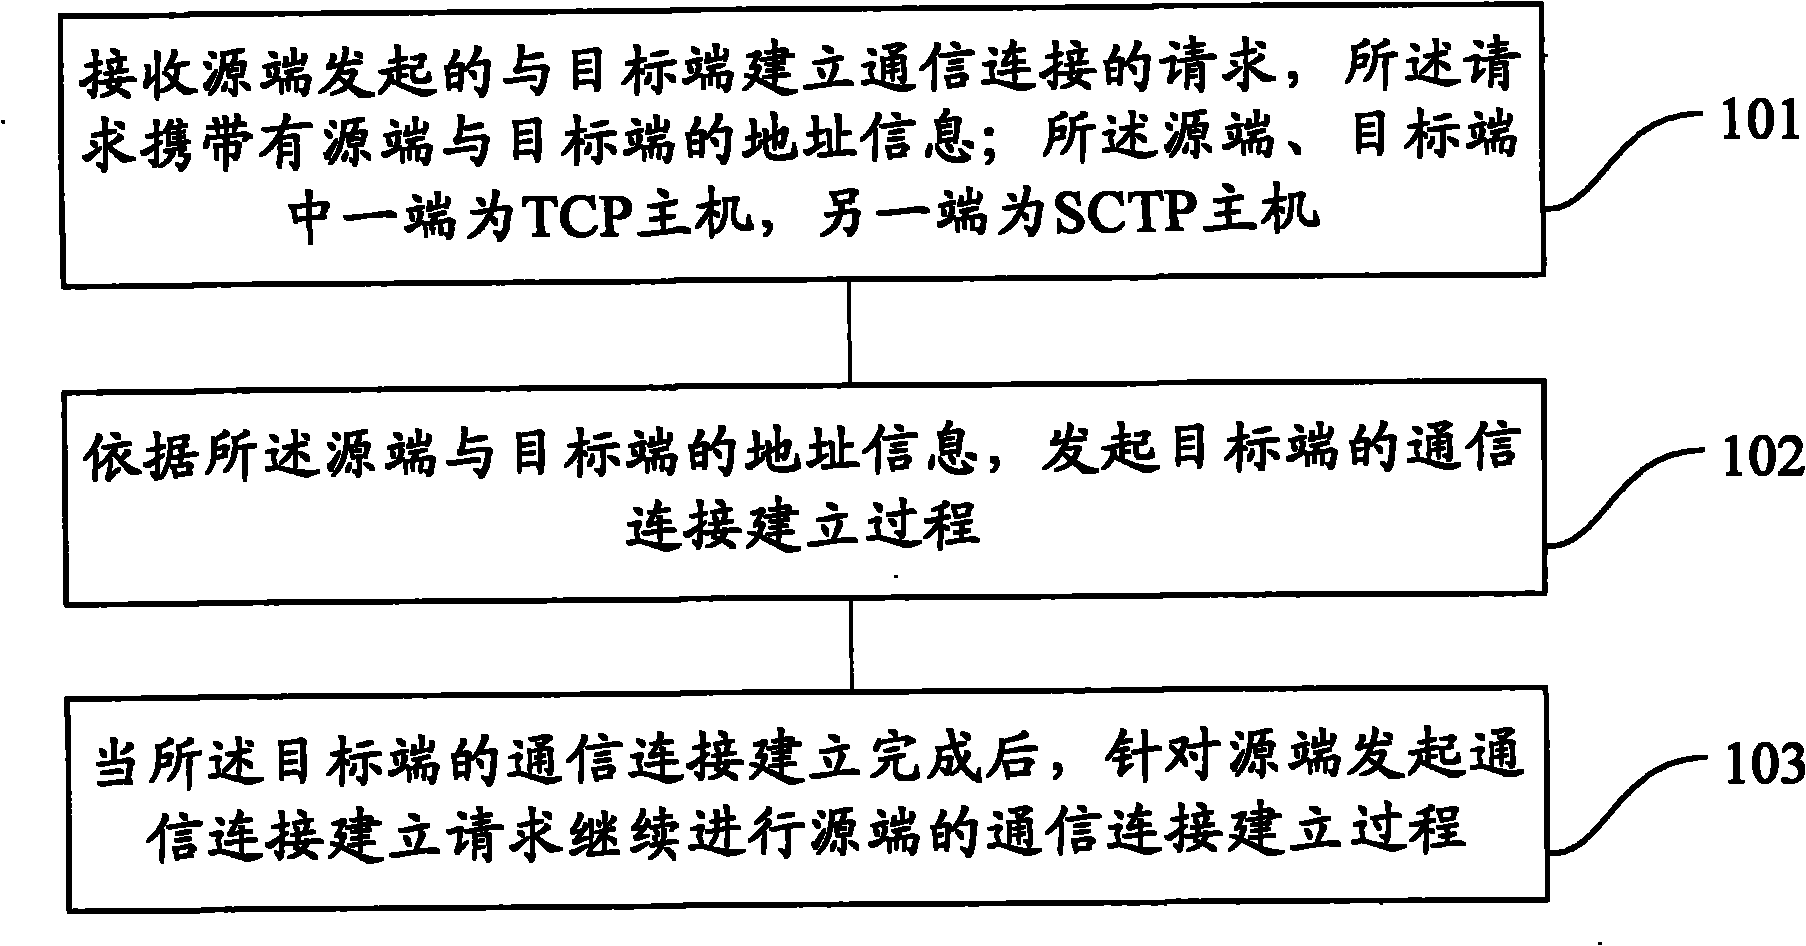 Method and device for intercommunicating TCP (Transmission Control Protocol) connection with SCTP (Stream Control Transmission Protocol) connection